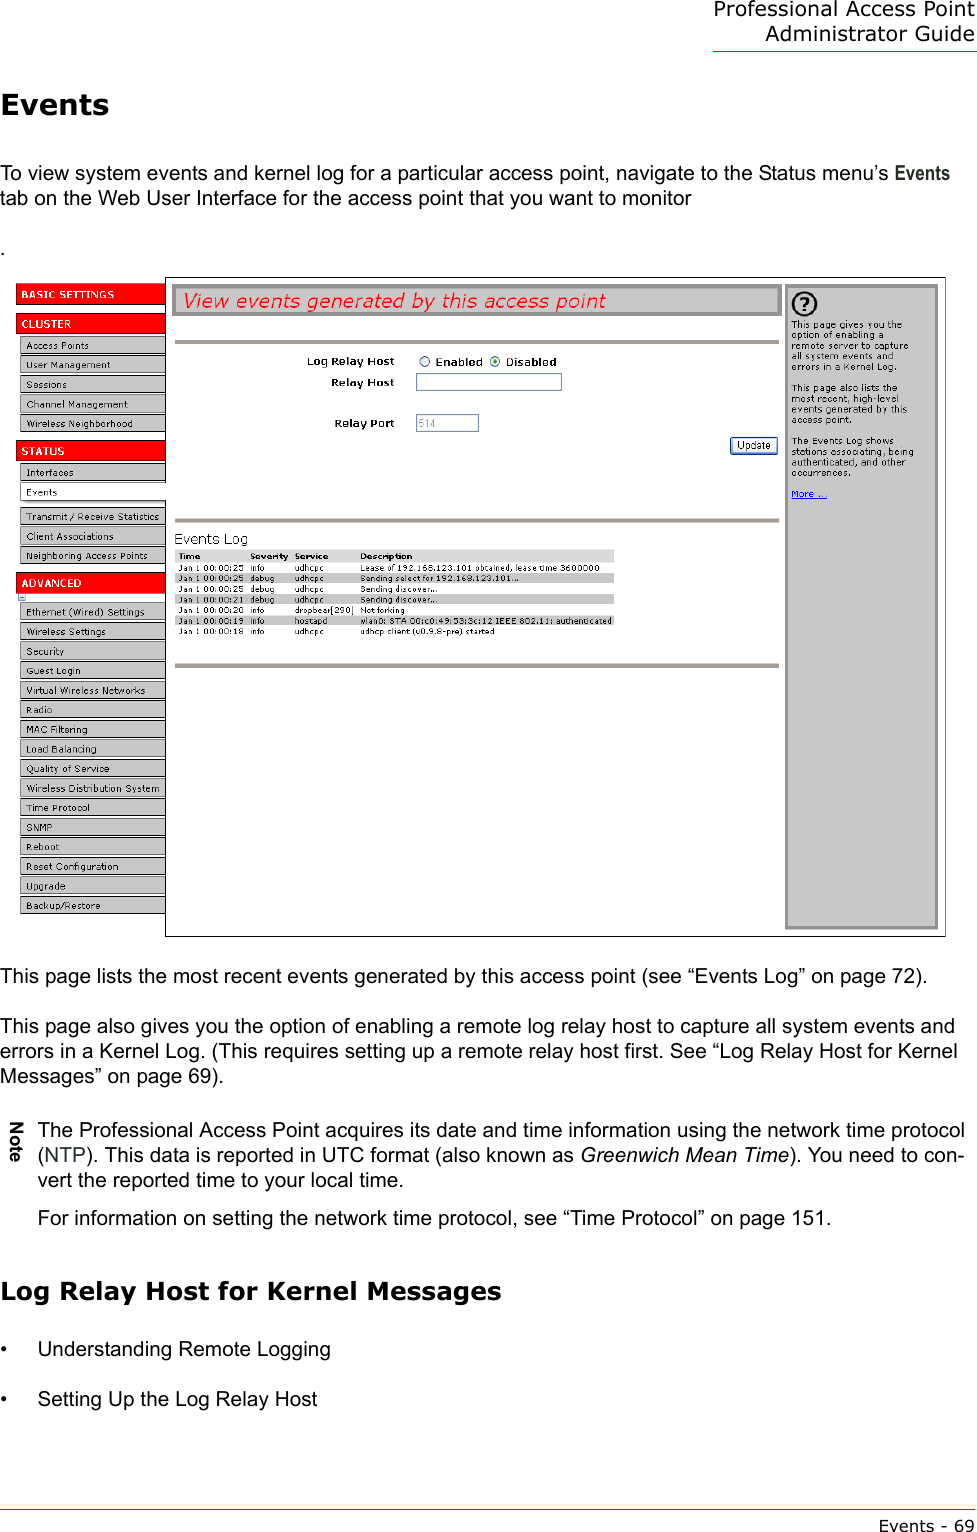 Professional Access Point Administrator GuideEvents - 69EventsTo view system events and kernel log for a particular access point, navigate to the Status menu’s Events tab on the Web User Interface for the access point that you want to monitor.This page lists the most recent events generated by this access point (see “Events Log” on page 72).This page also gives you the option of enabling a remote log relay host to capture all system events and errors in a Kernel Log. (This requires setting up a remote relay host first. See “Log Relay Host for Kernel Messages” on page 69).Log Relay Host for Kernel Messages•Understanding Remote Logging•Setting Up the Log Relay HostNoteThe Professional Access Point acquires its date and time information using the network time protocol (NTP). This data is reported in UTC format (also known as Greenwich Mean Time). You need to con-vert the reported time to your local time.For information on setting the network time protocol, see “Time Protocol” on page 151.